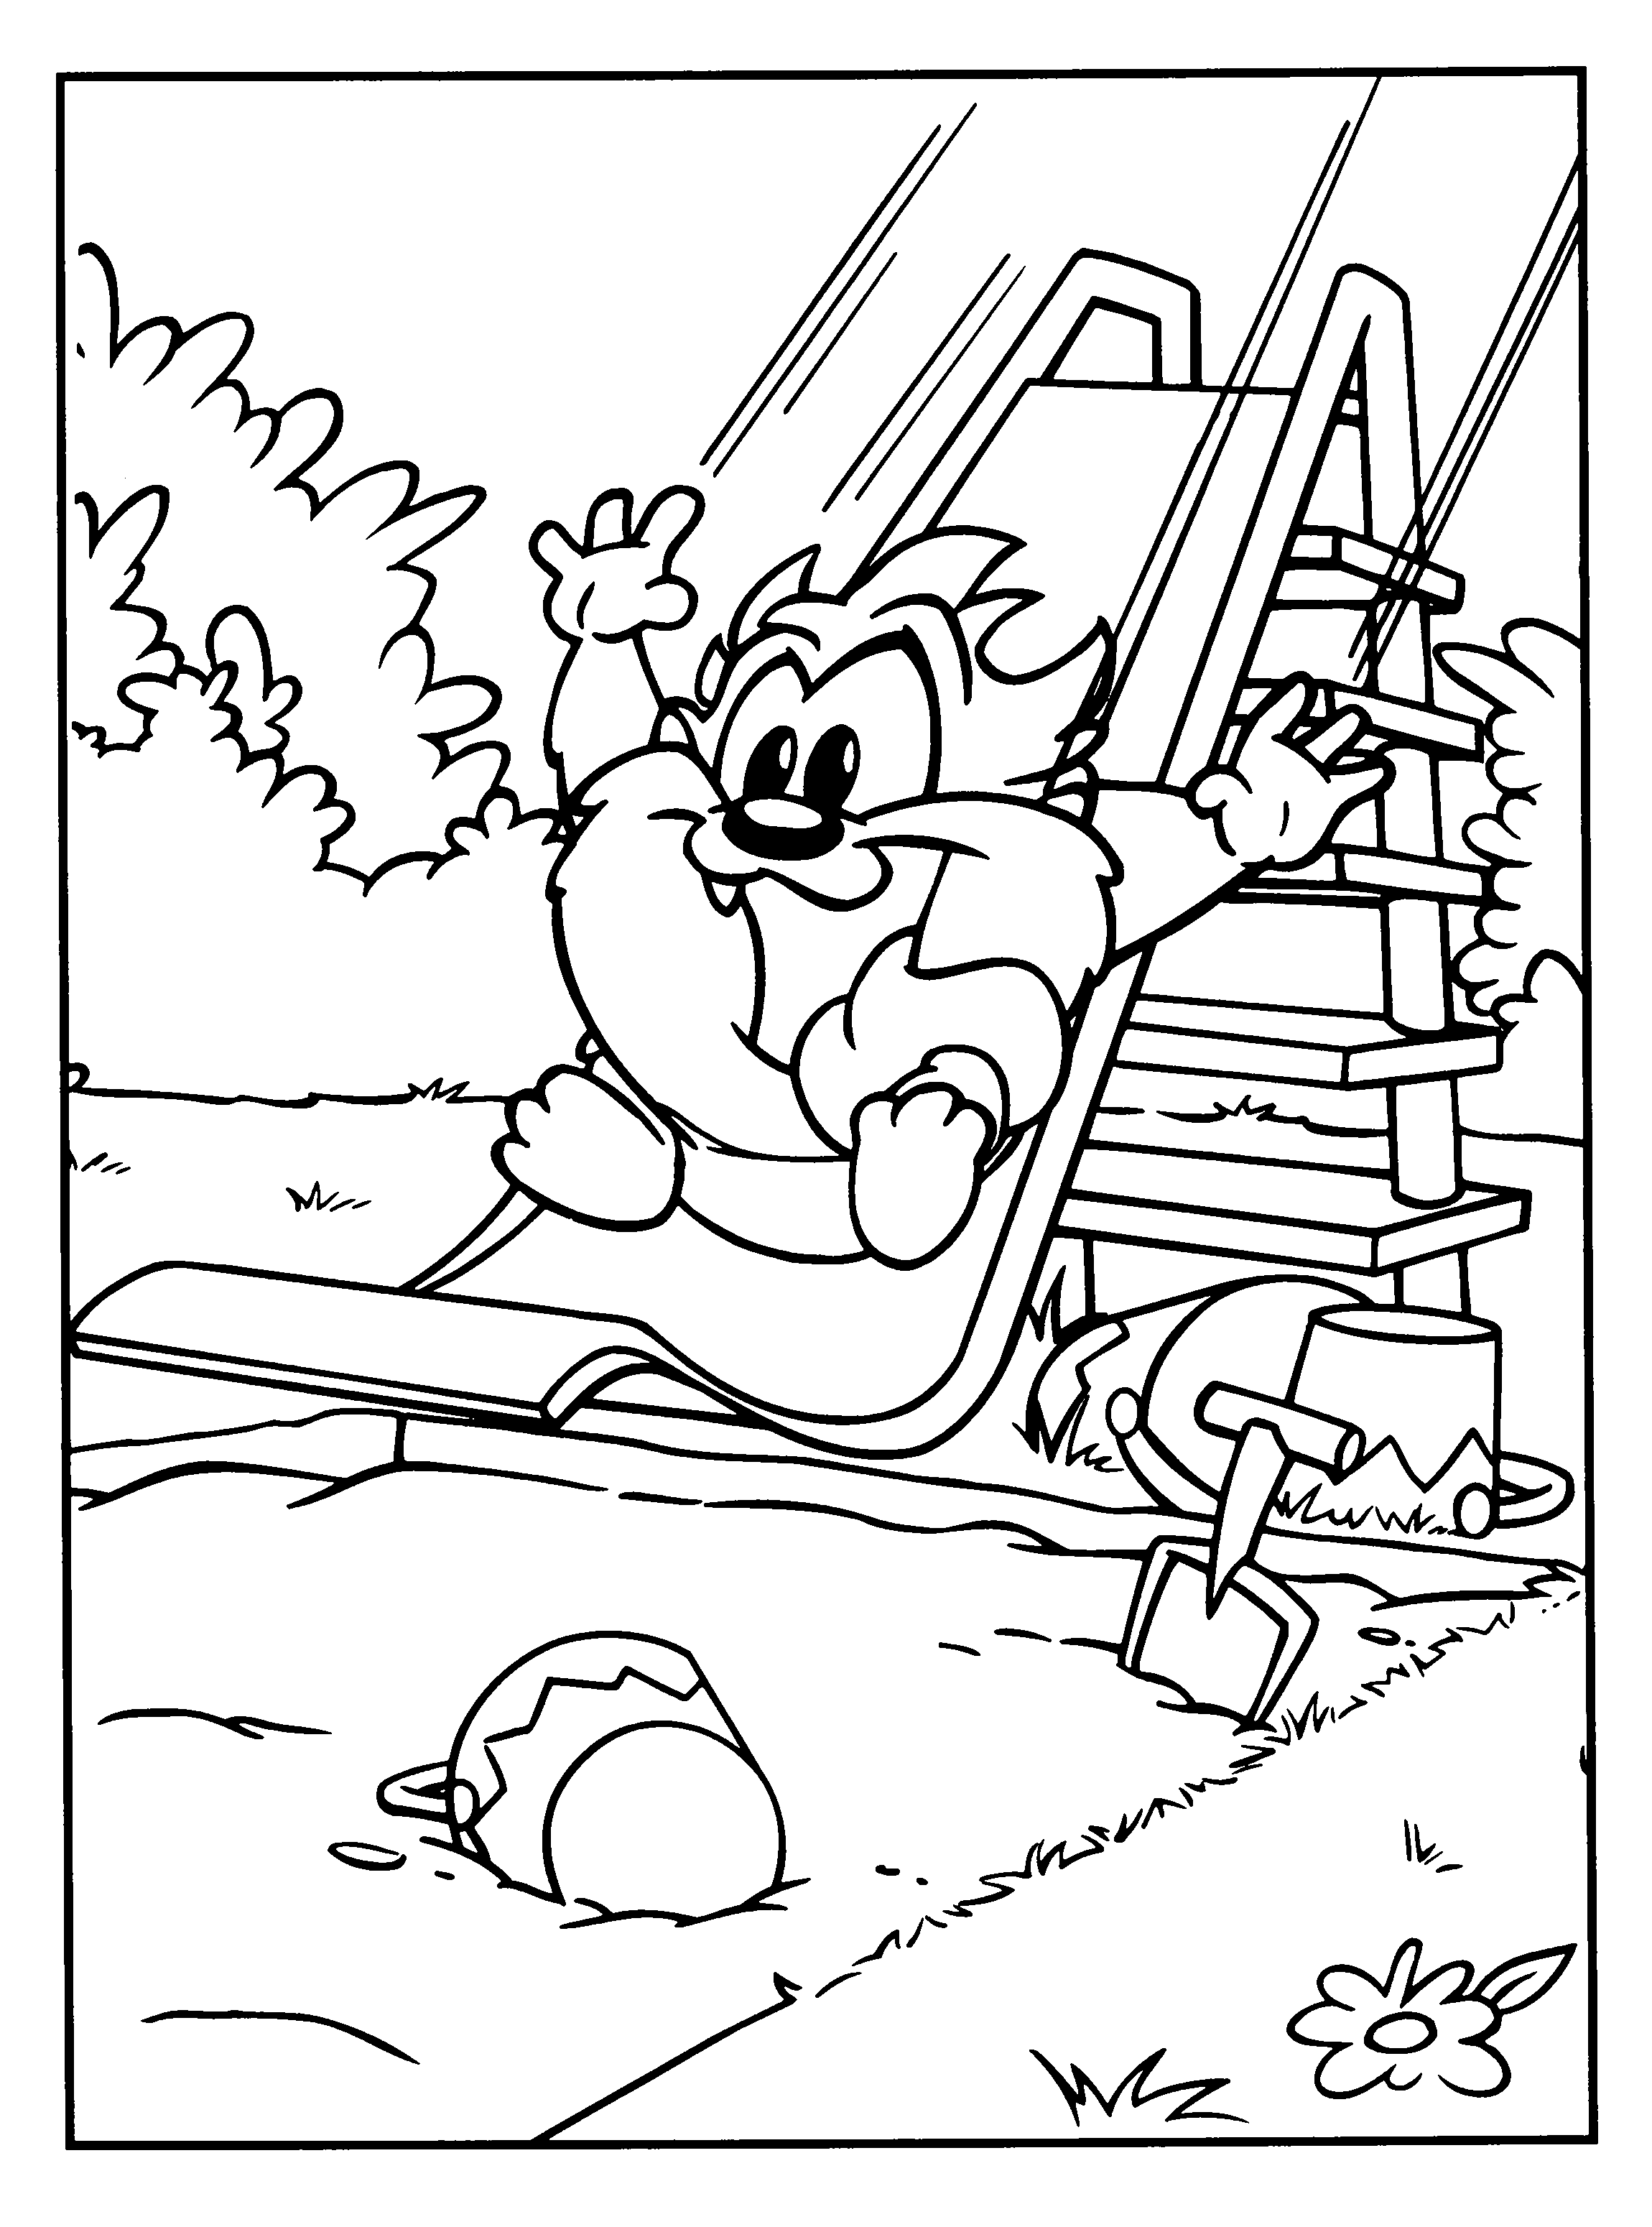 Coloring Page - Madagascar coloring pages 7